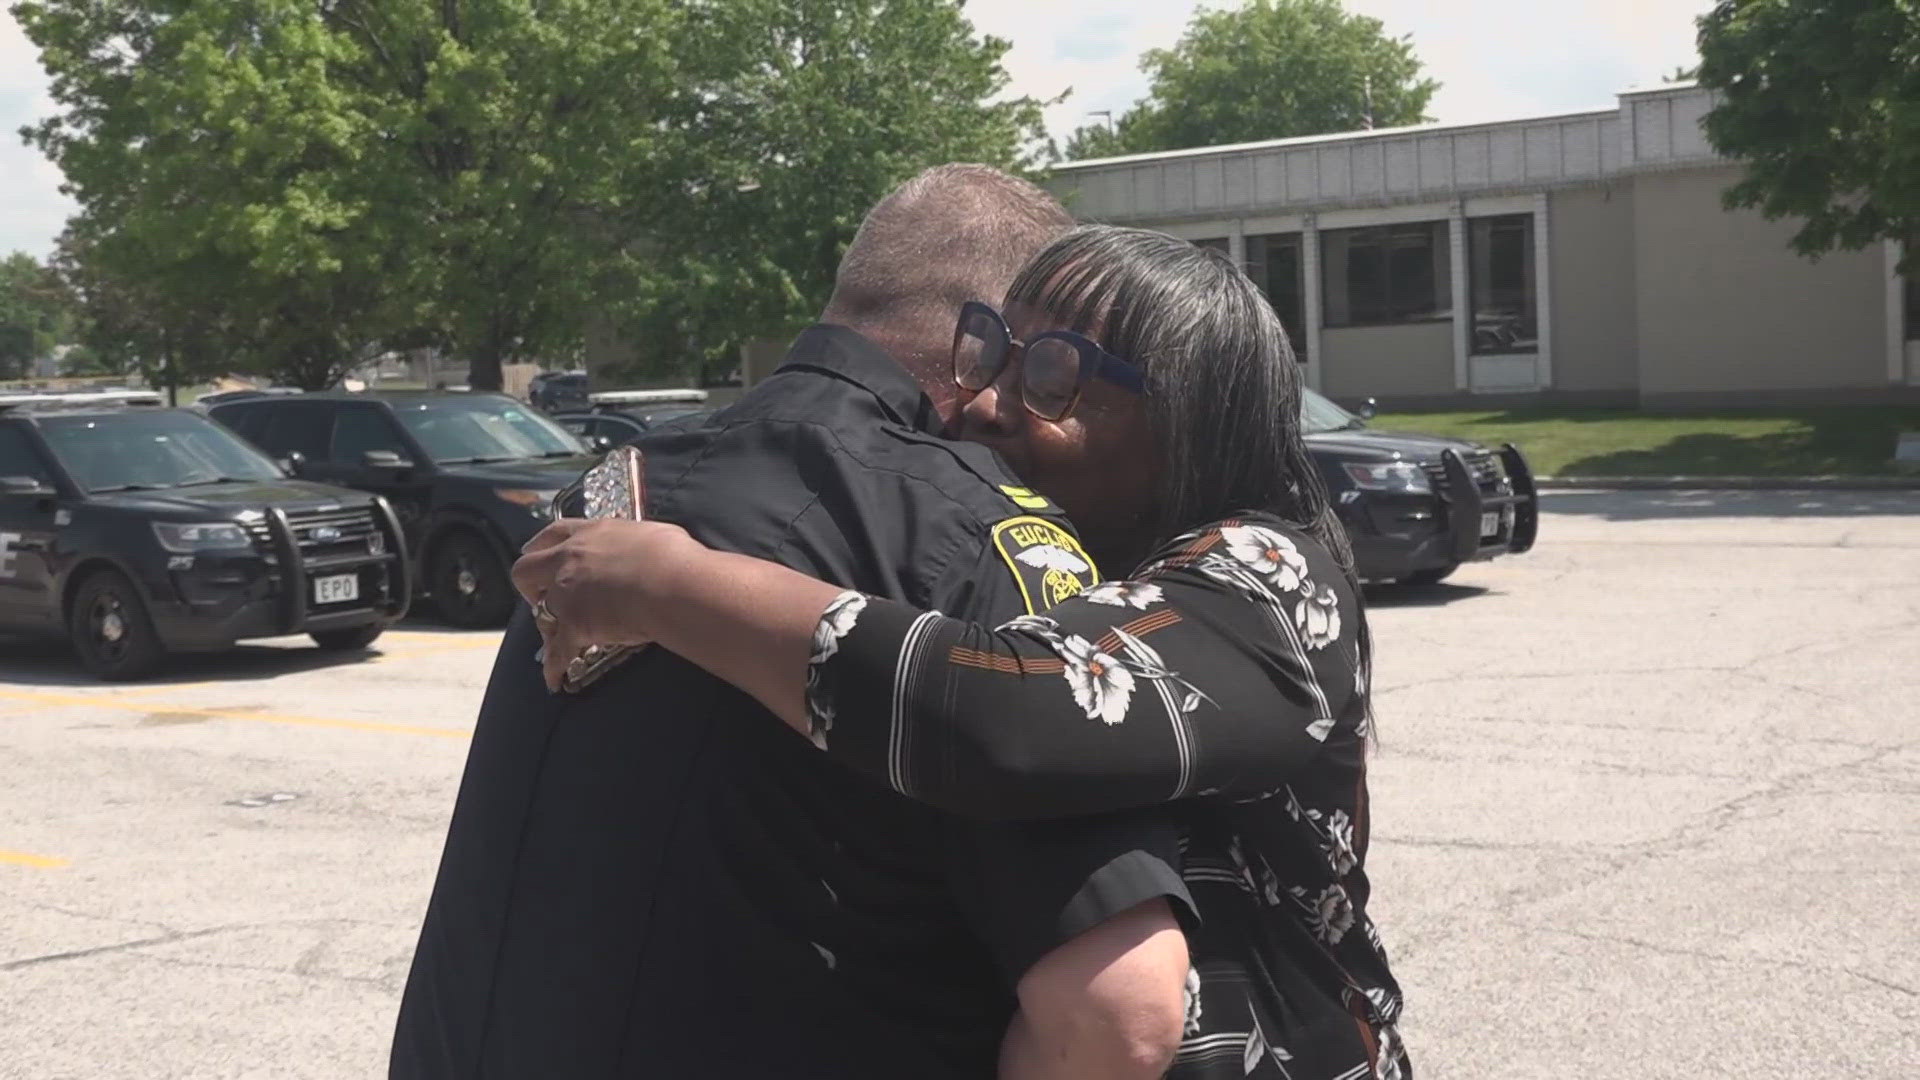 Just days following fallen Euclid Police Office Jacob Derbin’s funeral, people in the community are showing up as the department continues to grieve.